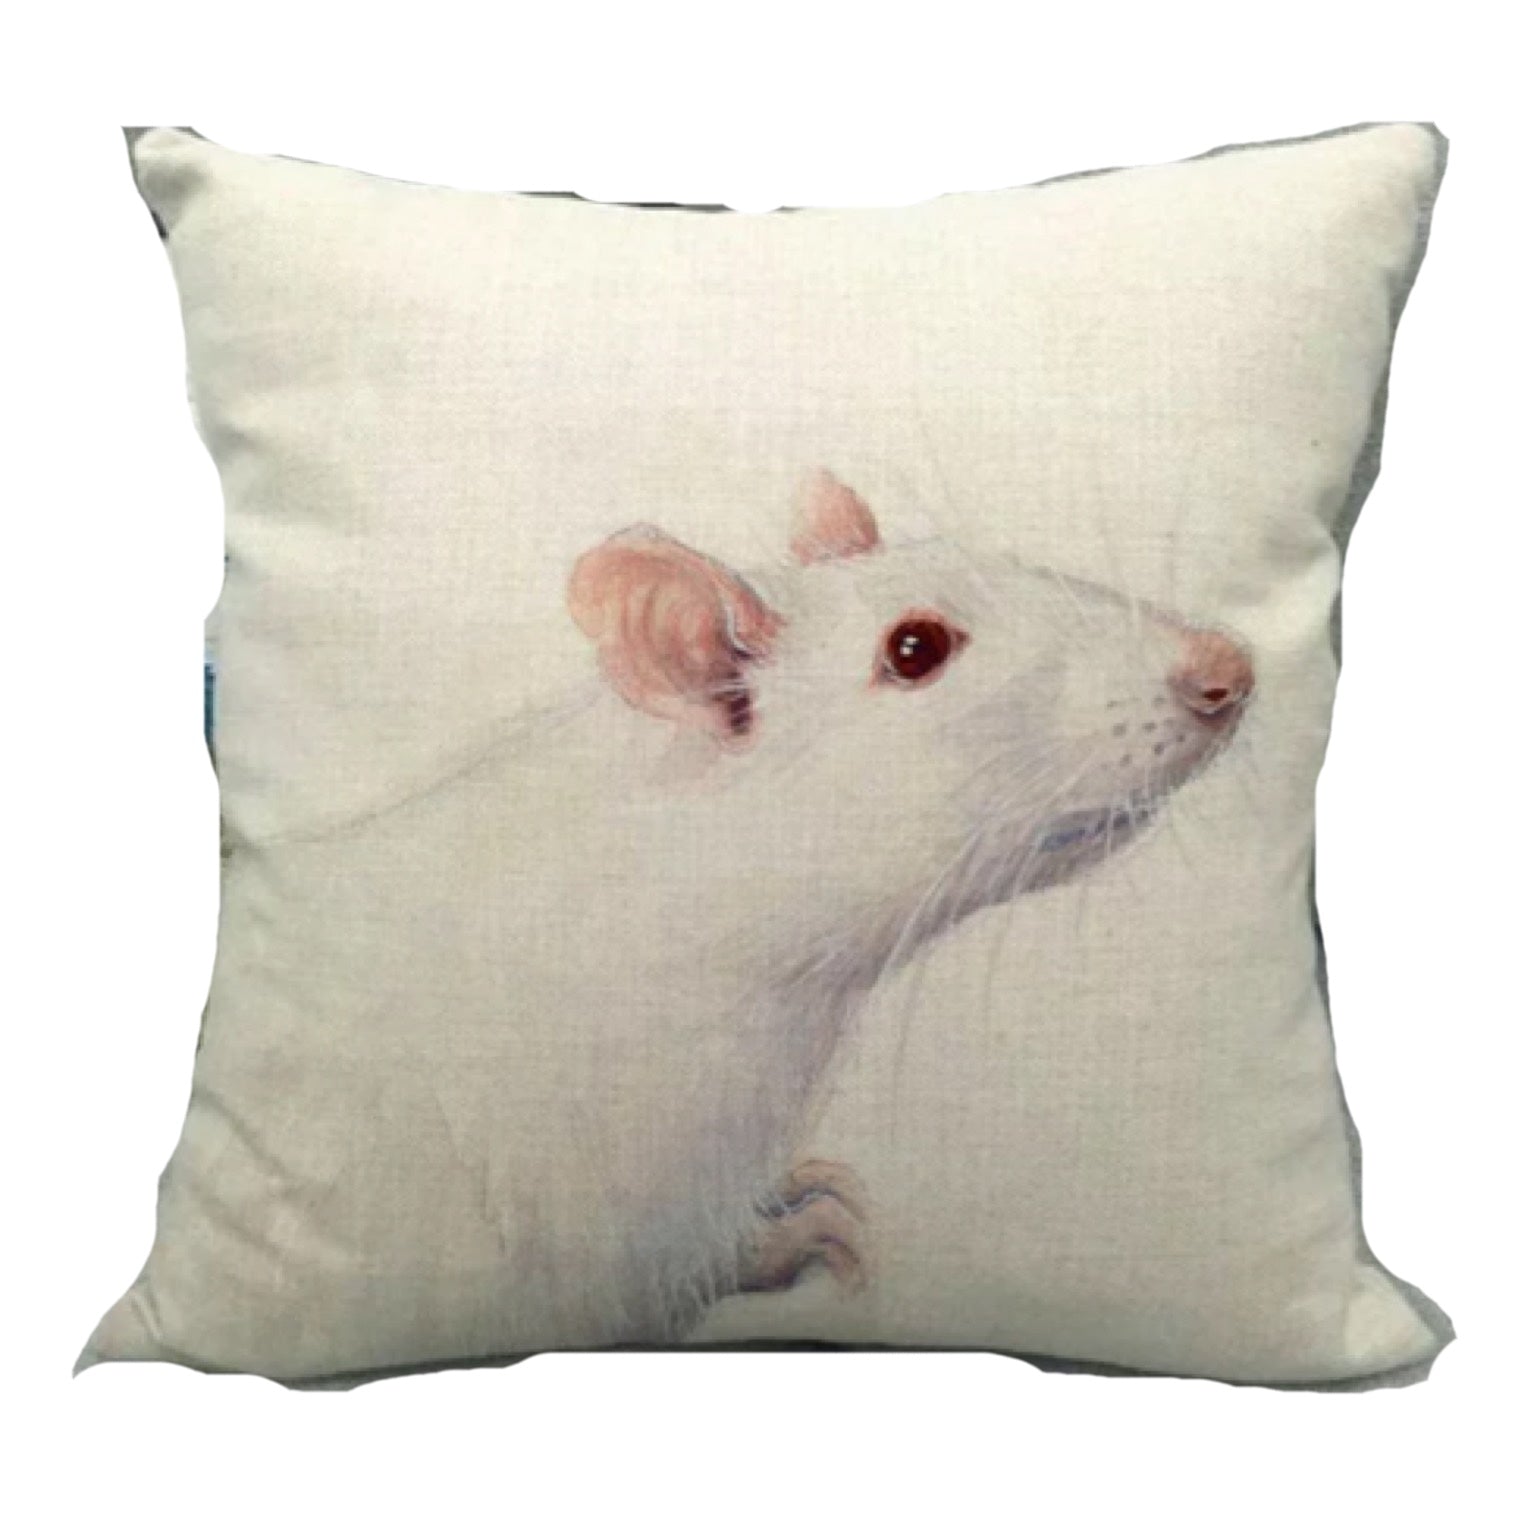 Cushion Cover Rat Mouse Emily - The Renmy Store Homewares & Gifts 